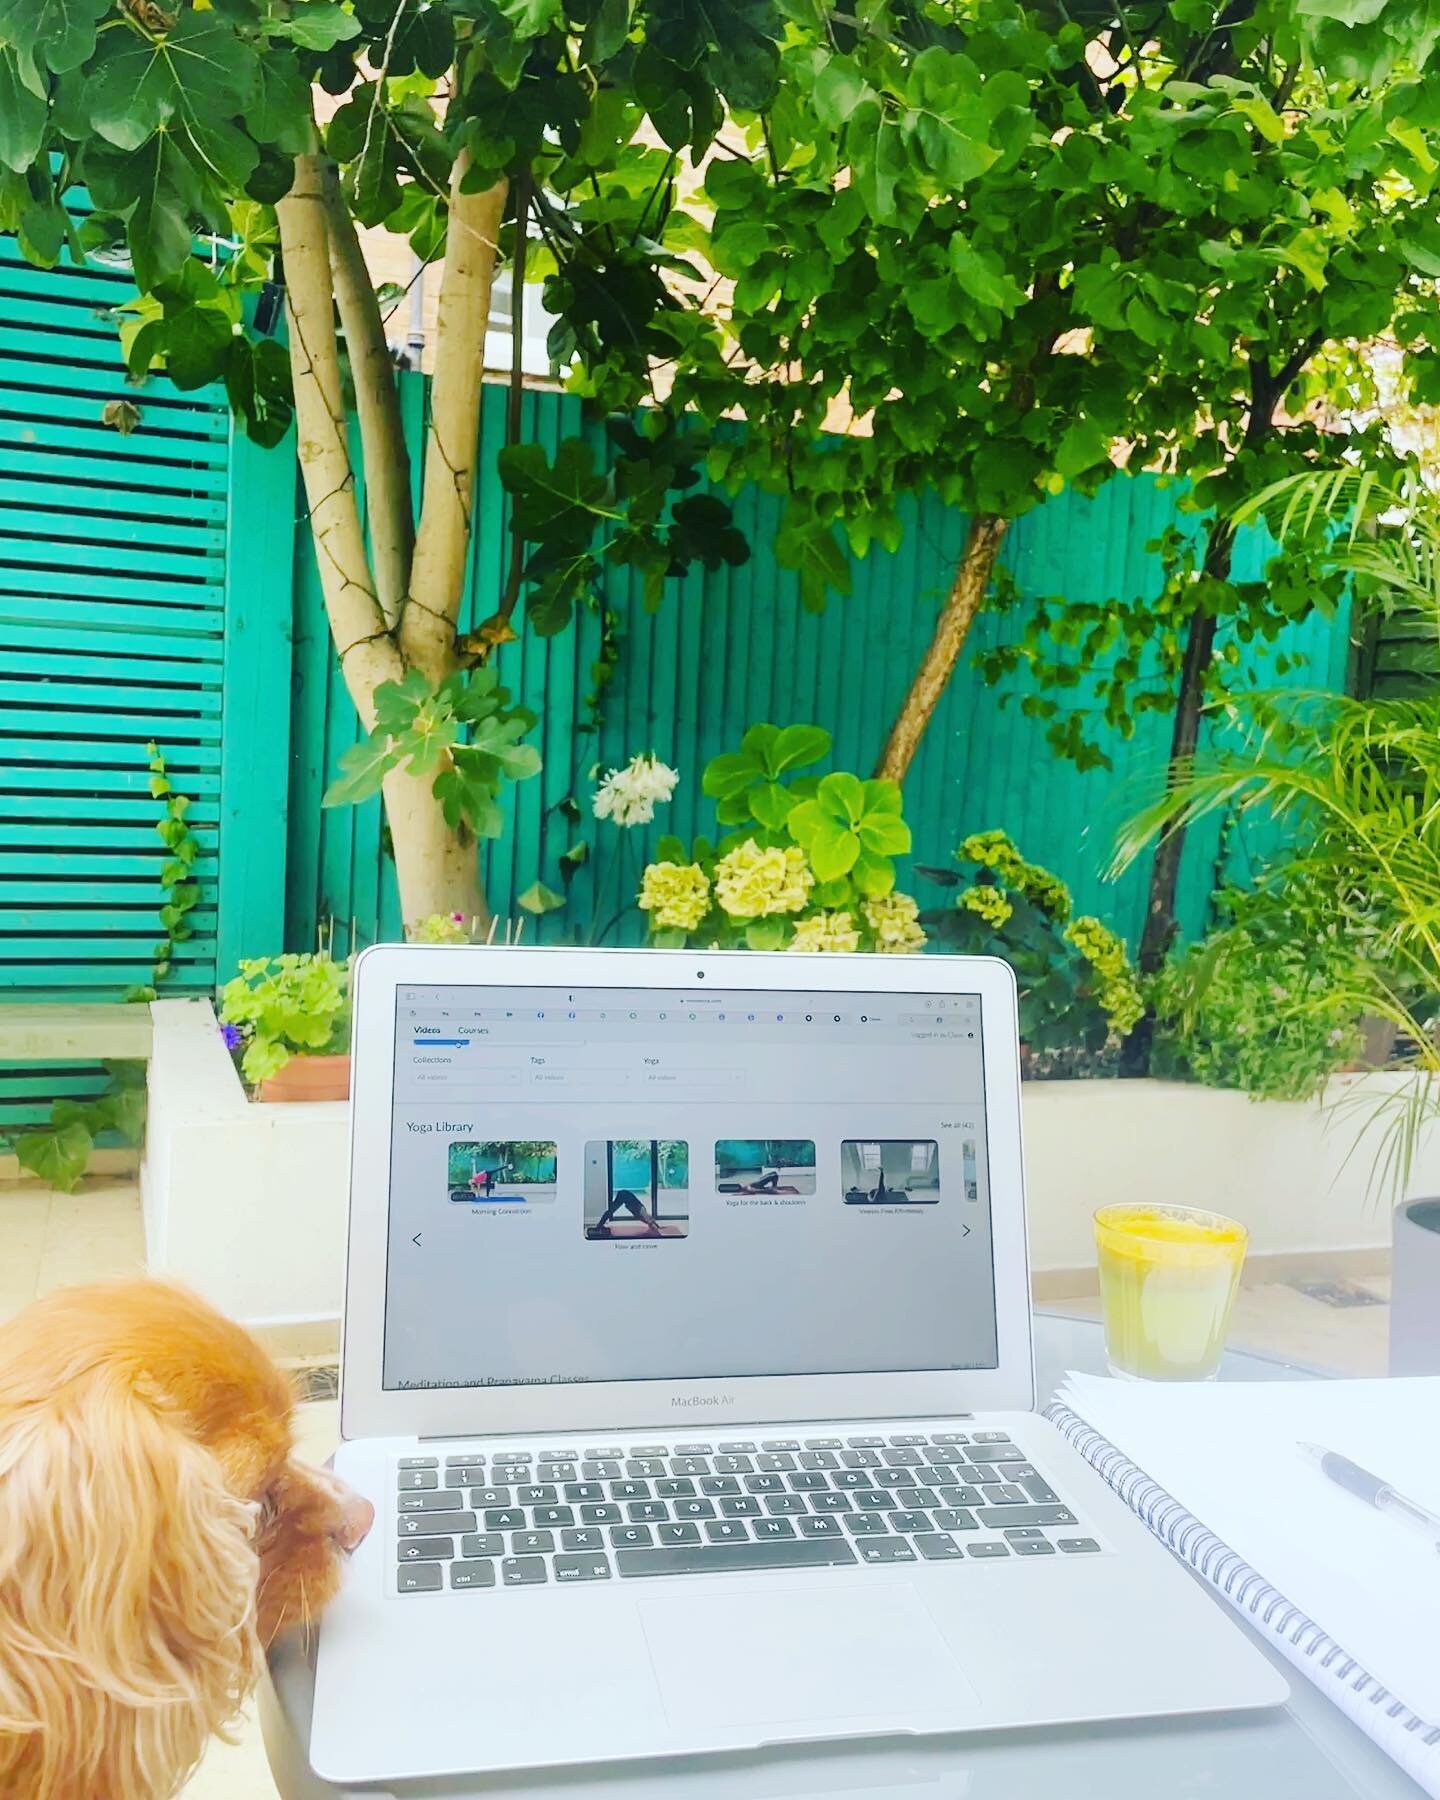 I&rsquo;ve been busy this morning filming some more classes for my On Demand Yoga Channel and now I&rsquo;m sat here in my garden (under the fig tree) downloading them onto the platform. I have my little assistant Suki here giving her nod of approval